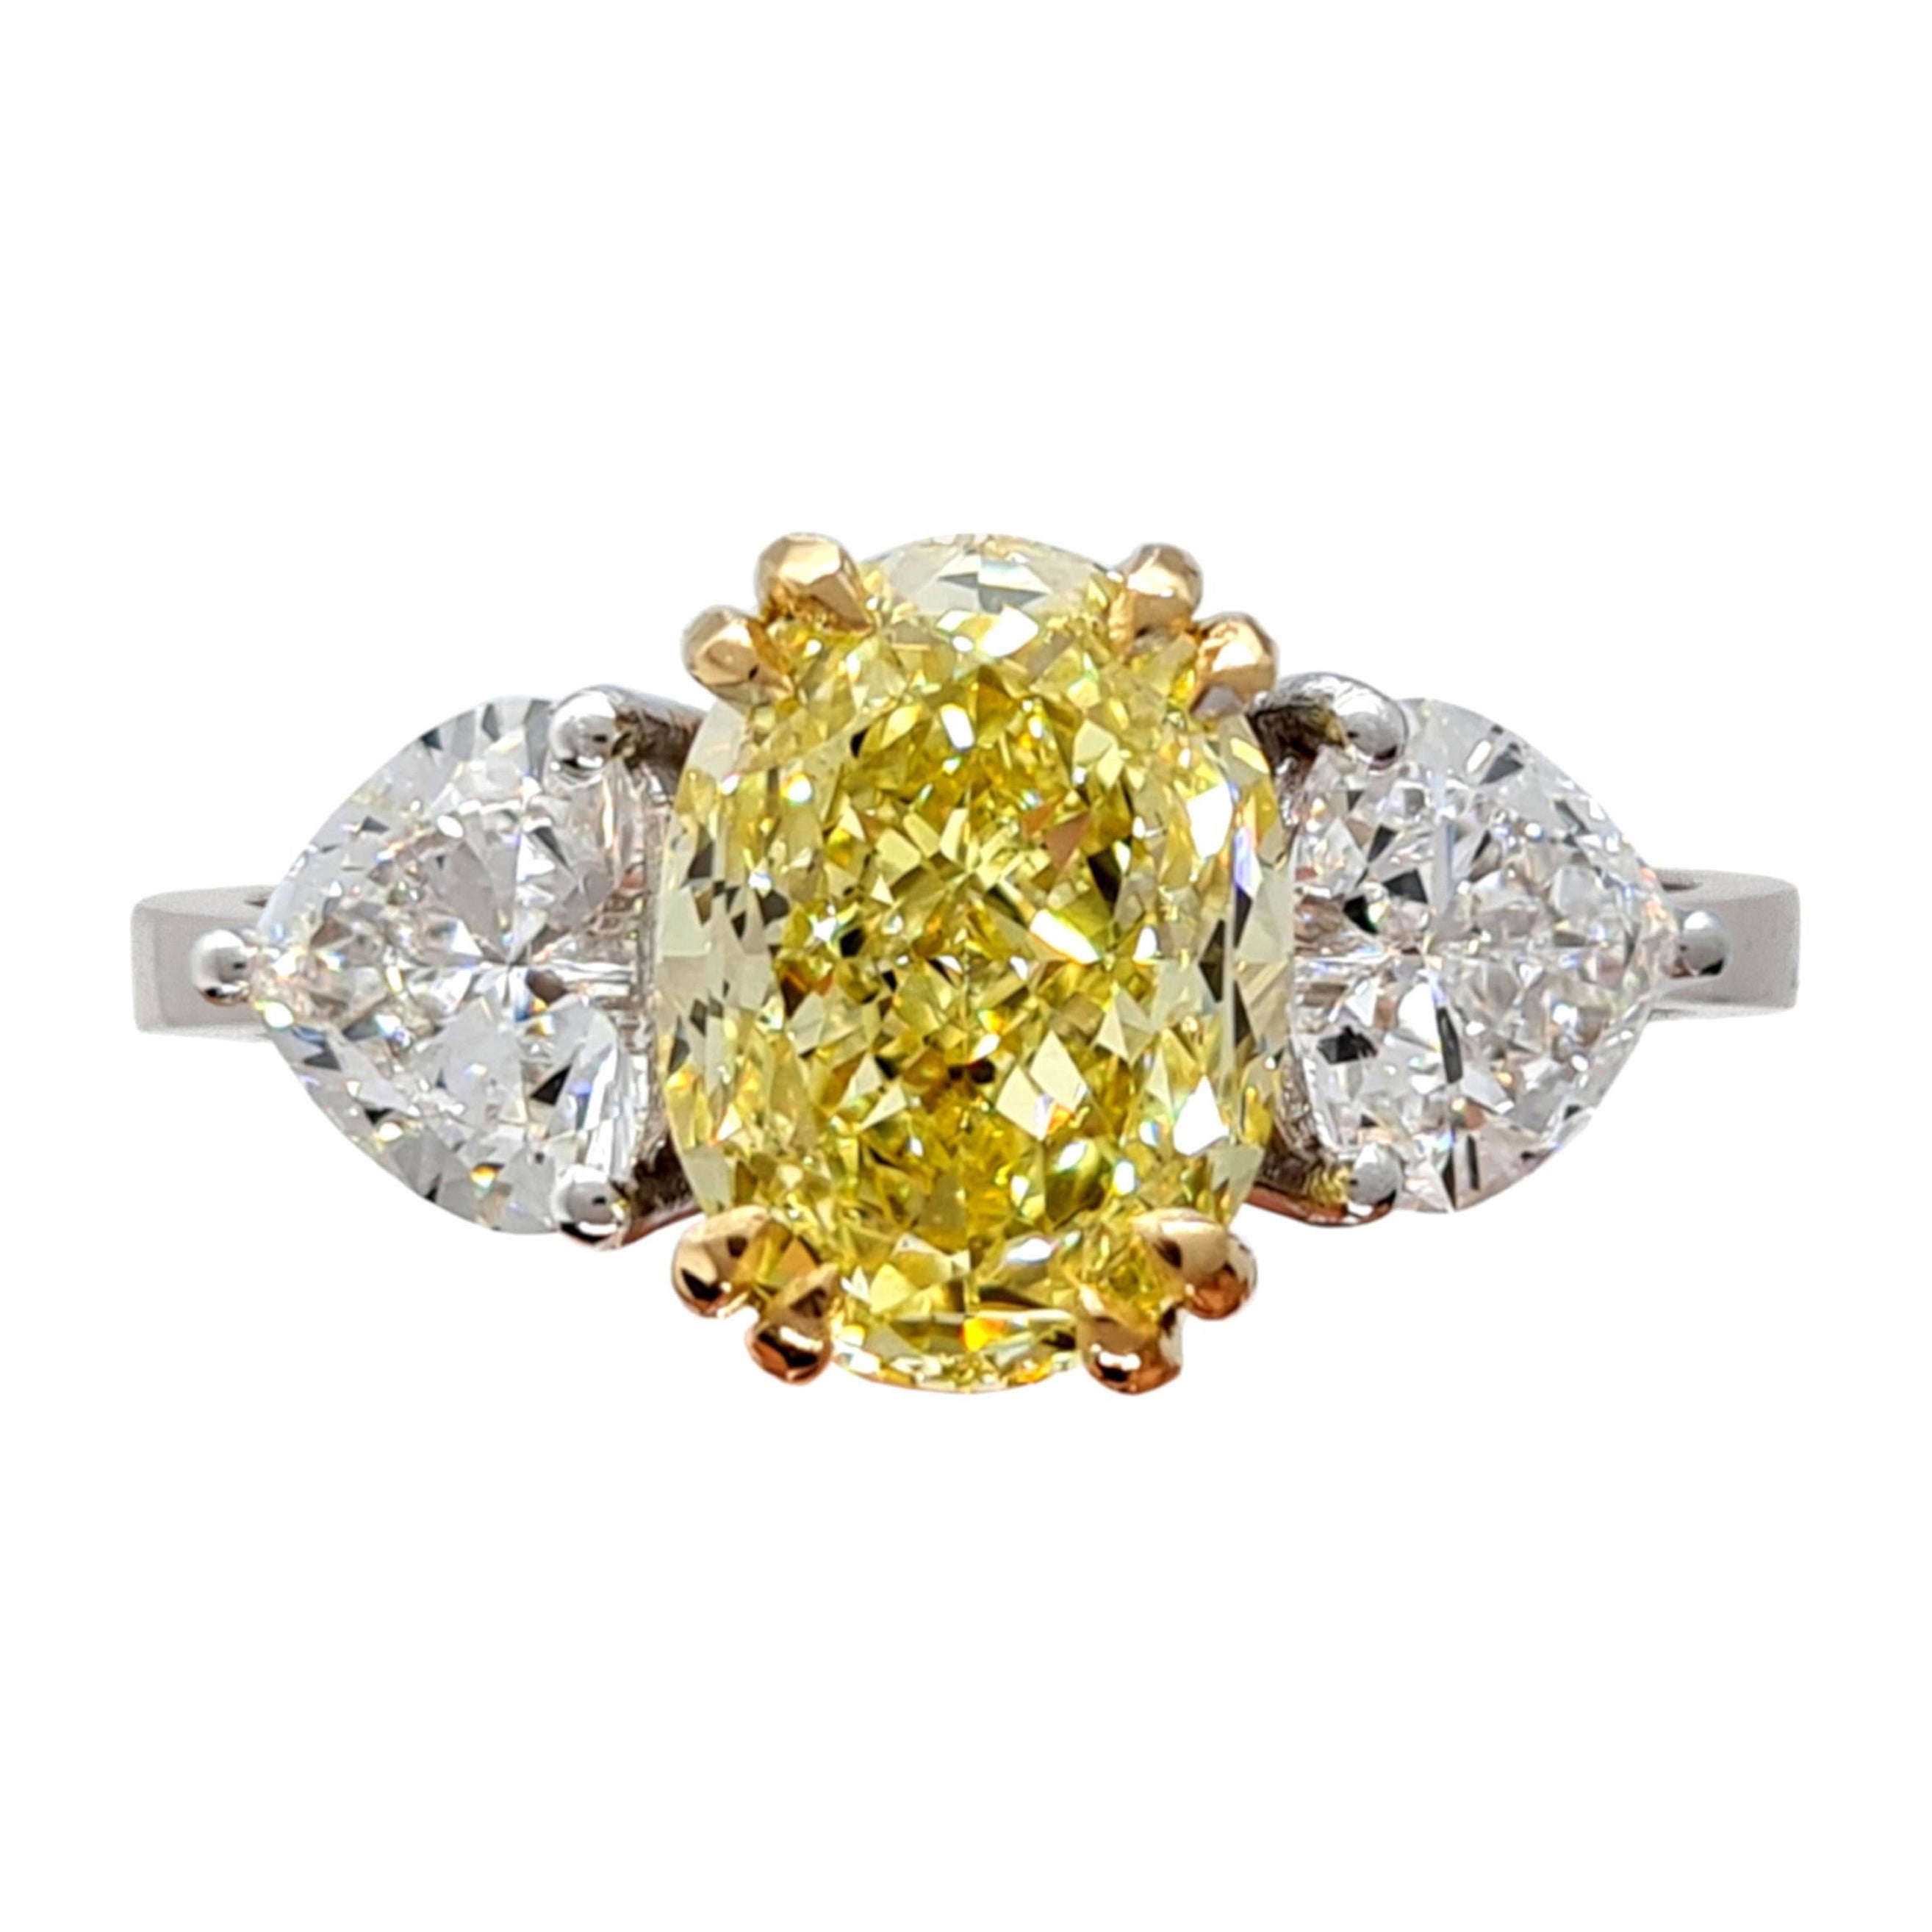 GIA Certified 2.5 Carat Fancy Yellow Oval Diamond 18k Gold Ring For Sale